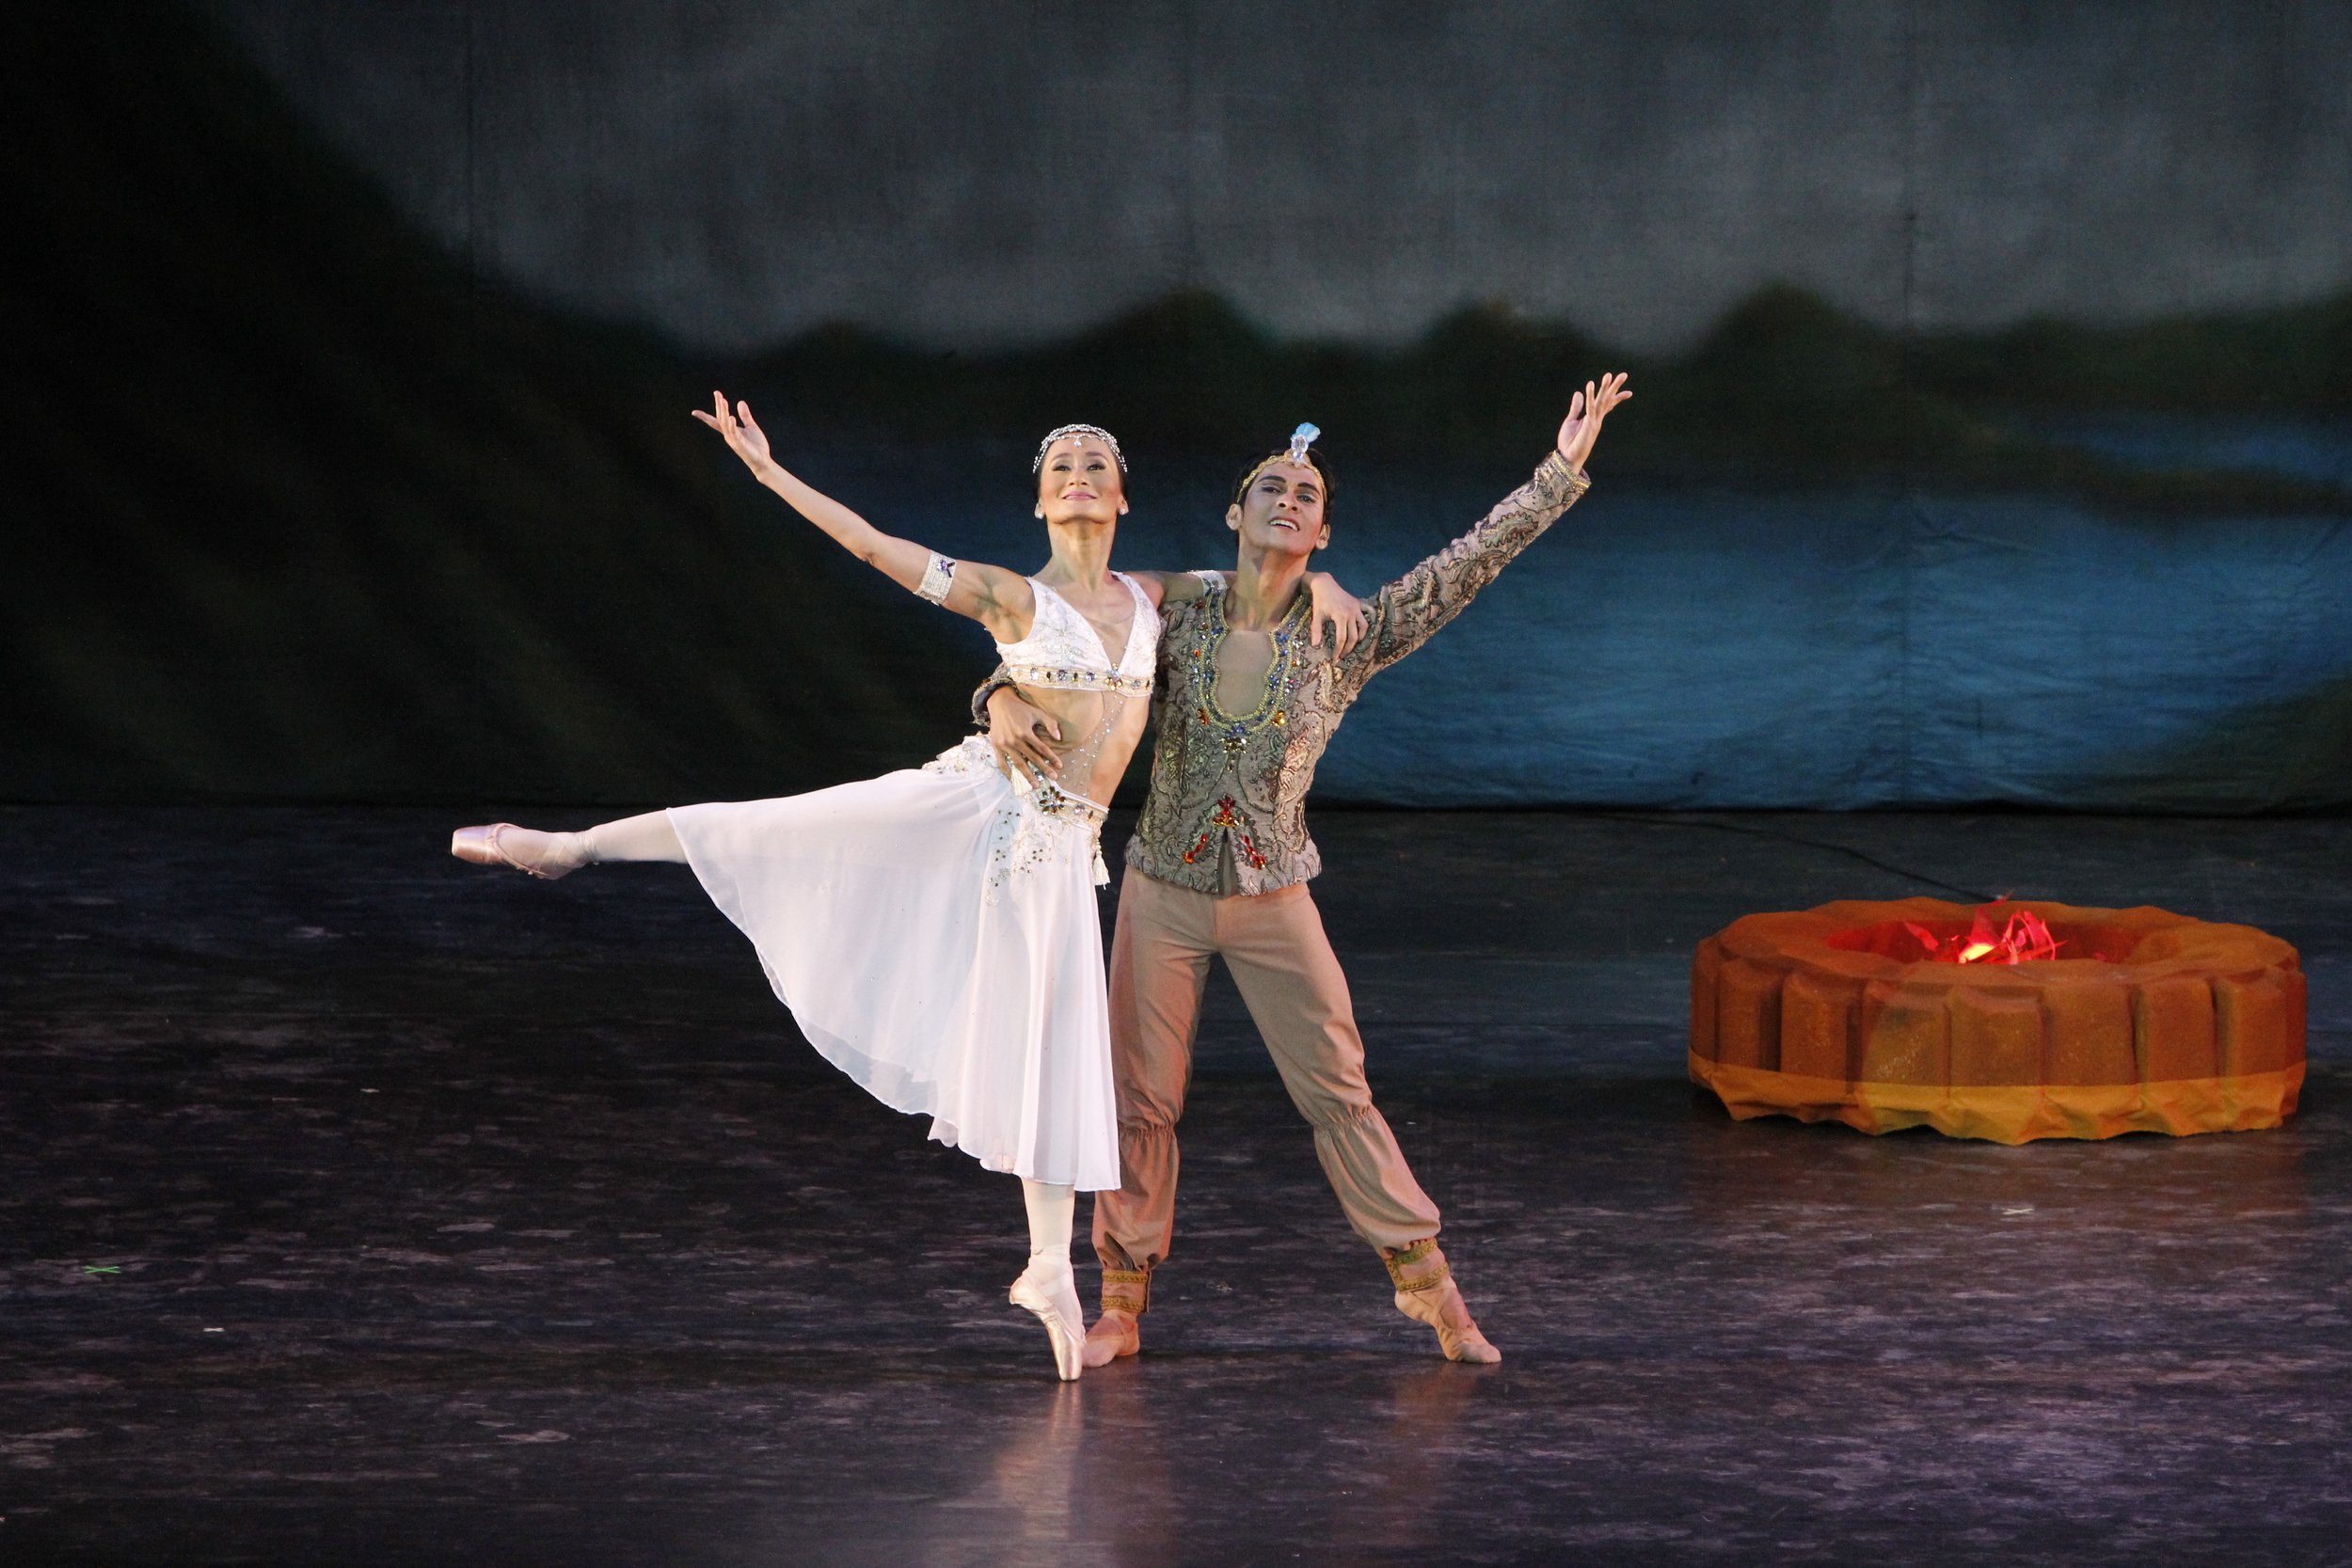    Nikiya (Lisa Macuja-Elizalde) and Solor (Rudy De Dios) swear their eternal love for each other by the sacred fire in  La Bayadere  (2013). Their costumes reflect an Indian fashion sensibility, she in white and he in taupe, both bearing accents of 